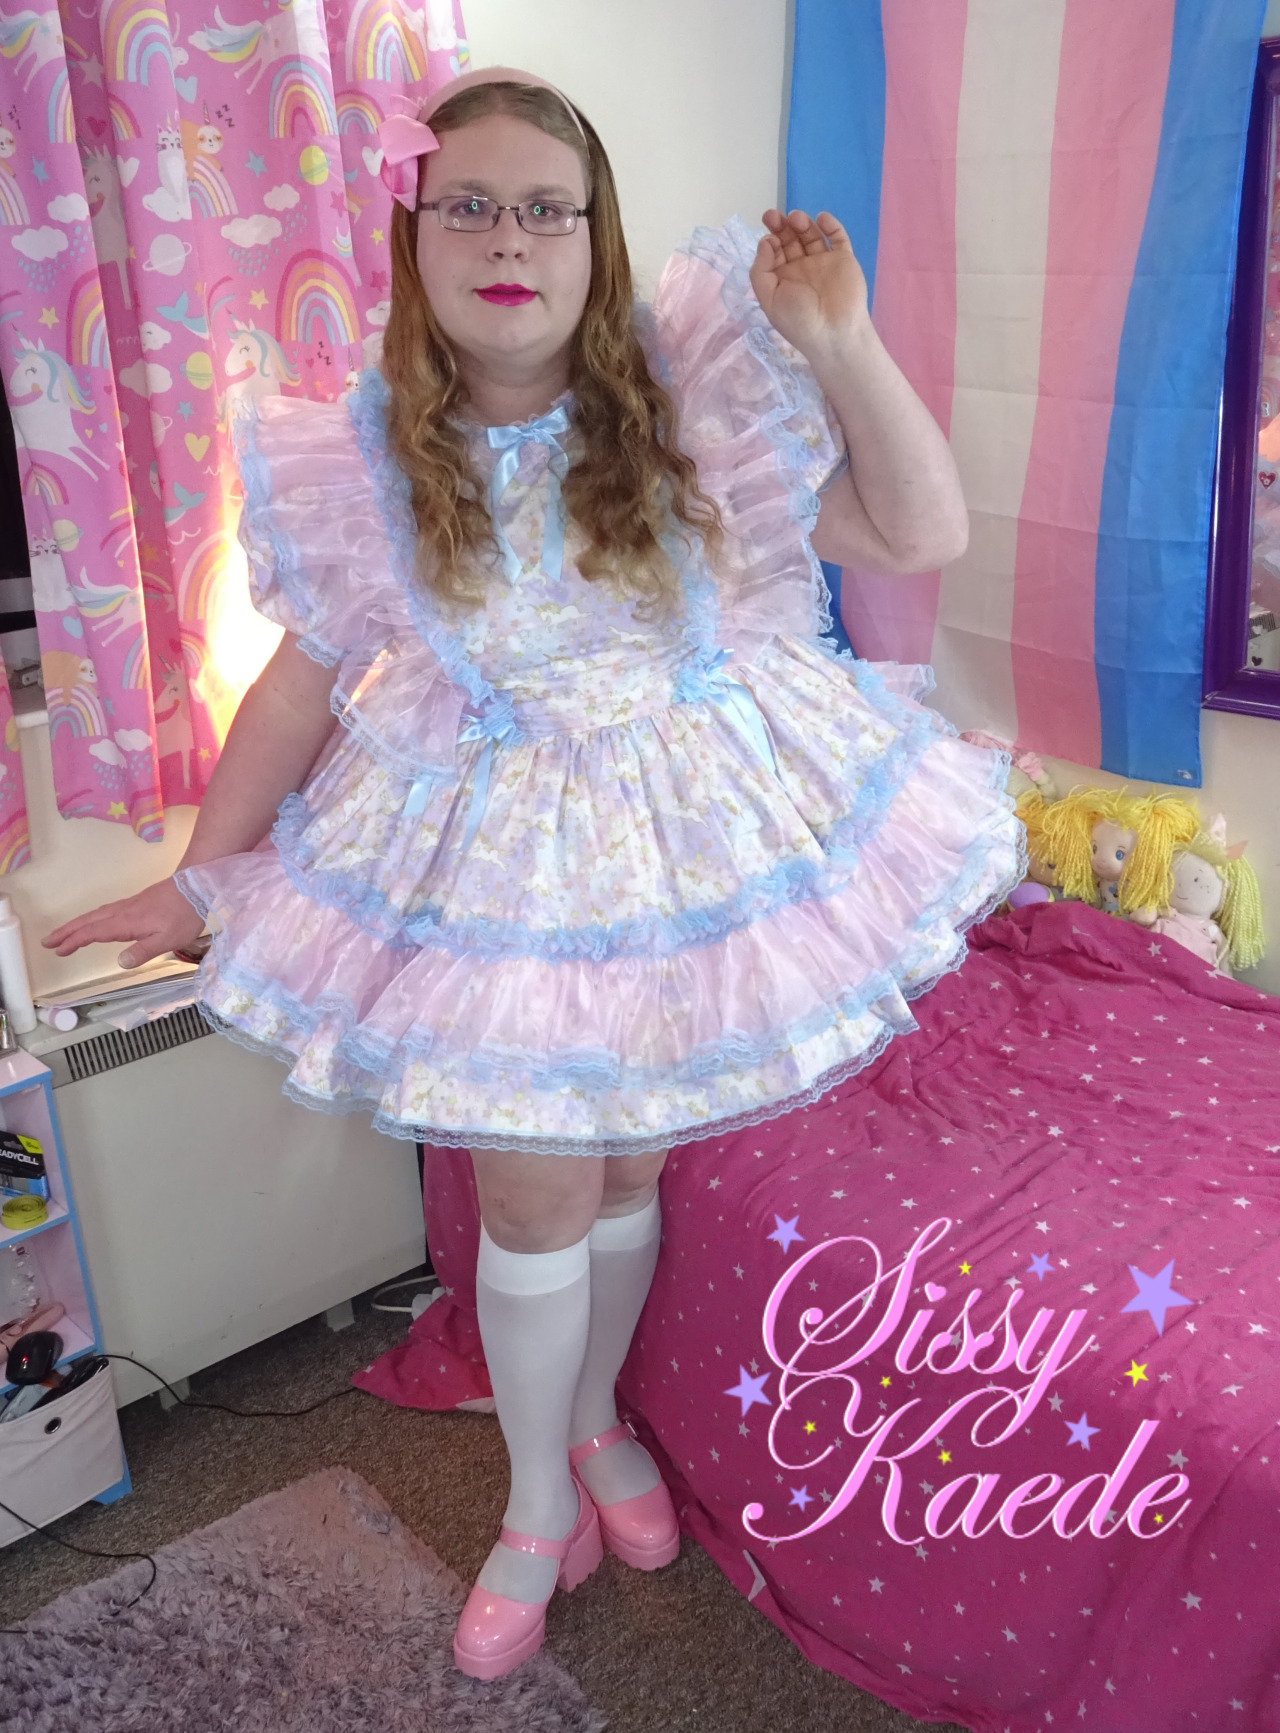 Second pony dress from Babra Tam, just had to have both hehe. This sissy needs to be in her frills as much as she can, extra poofy frilly dresses are just the best hehe. 